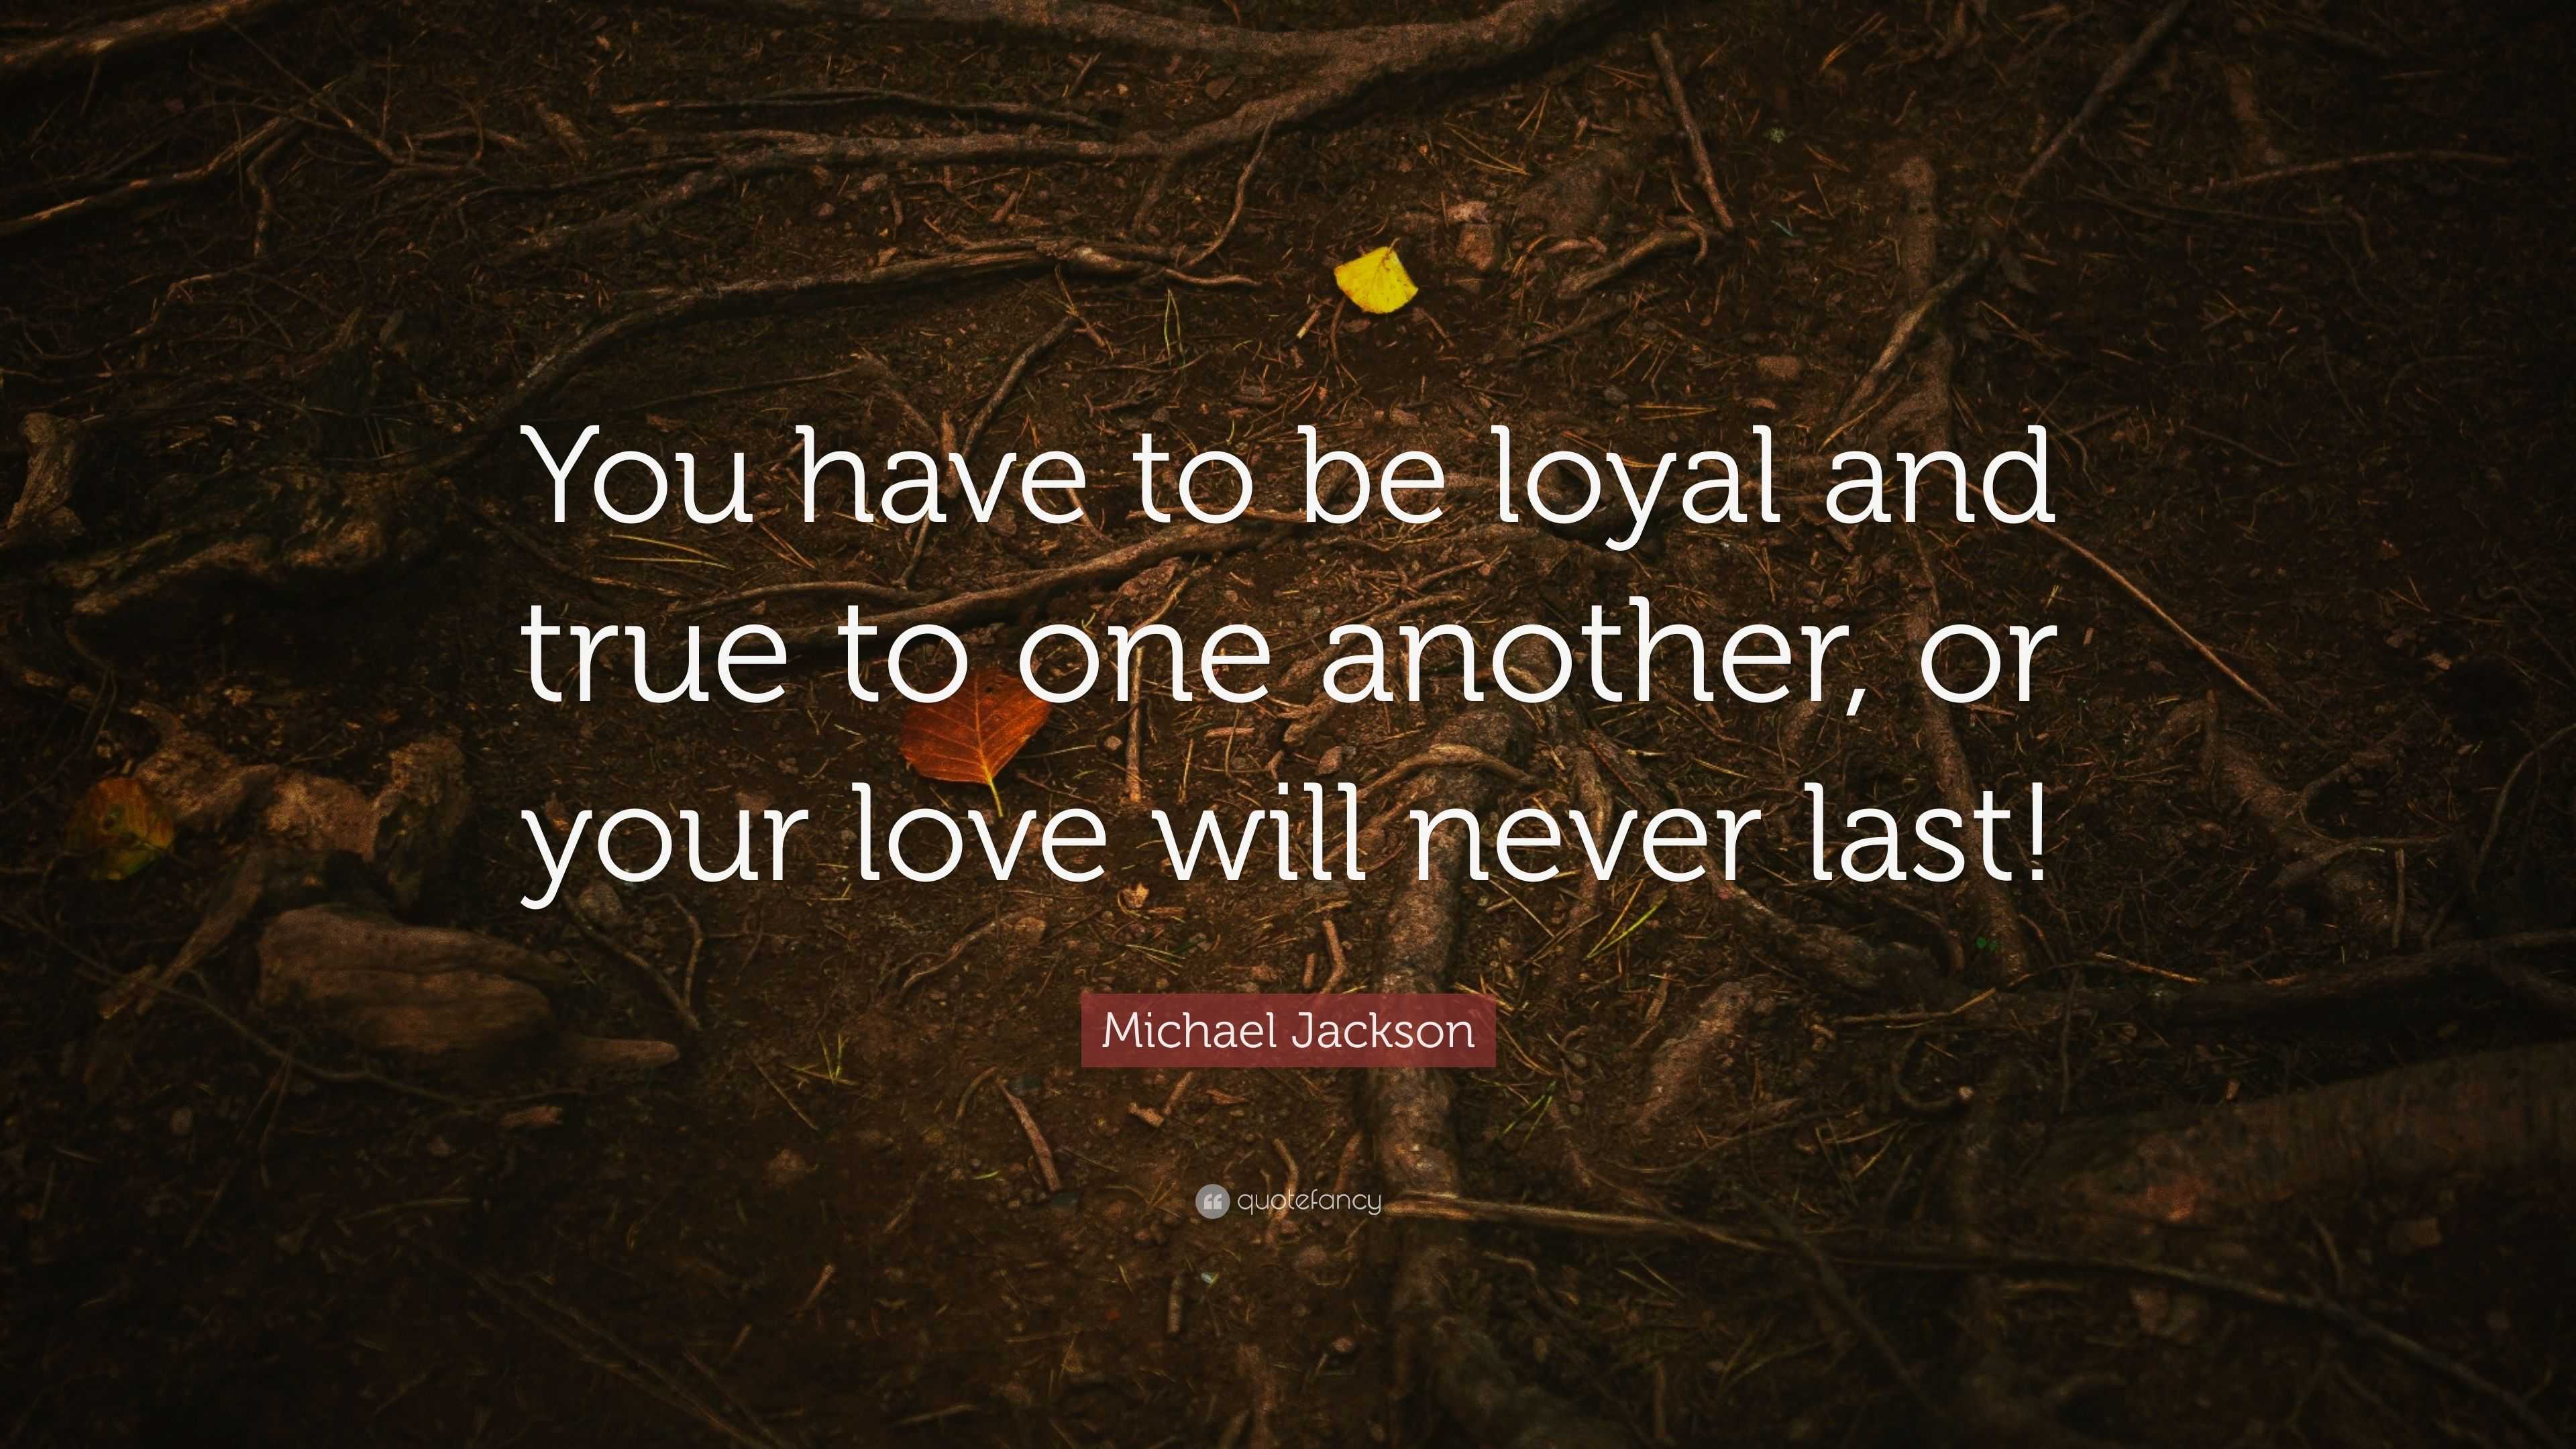 Michael Jackson Quote “You have to be loyal and true to one another